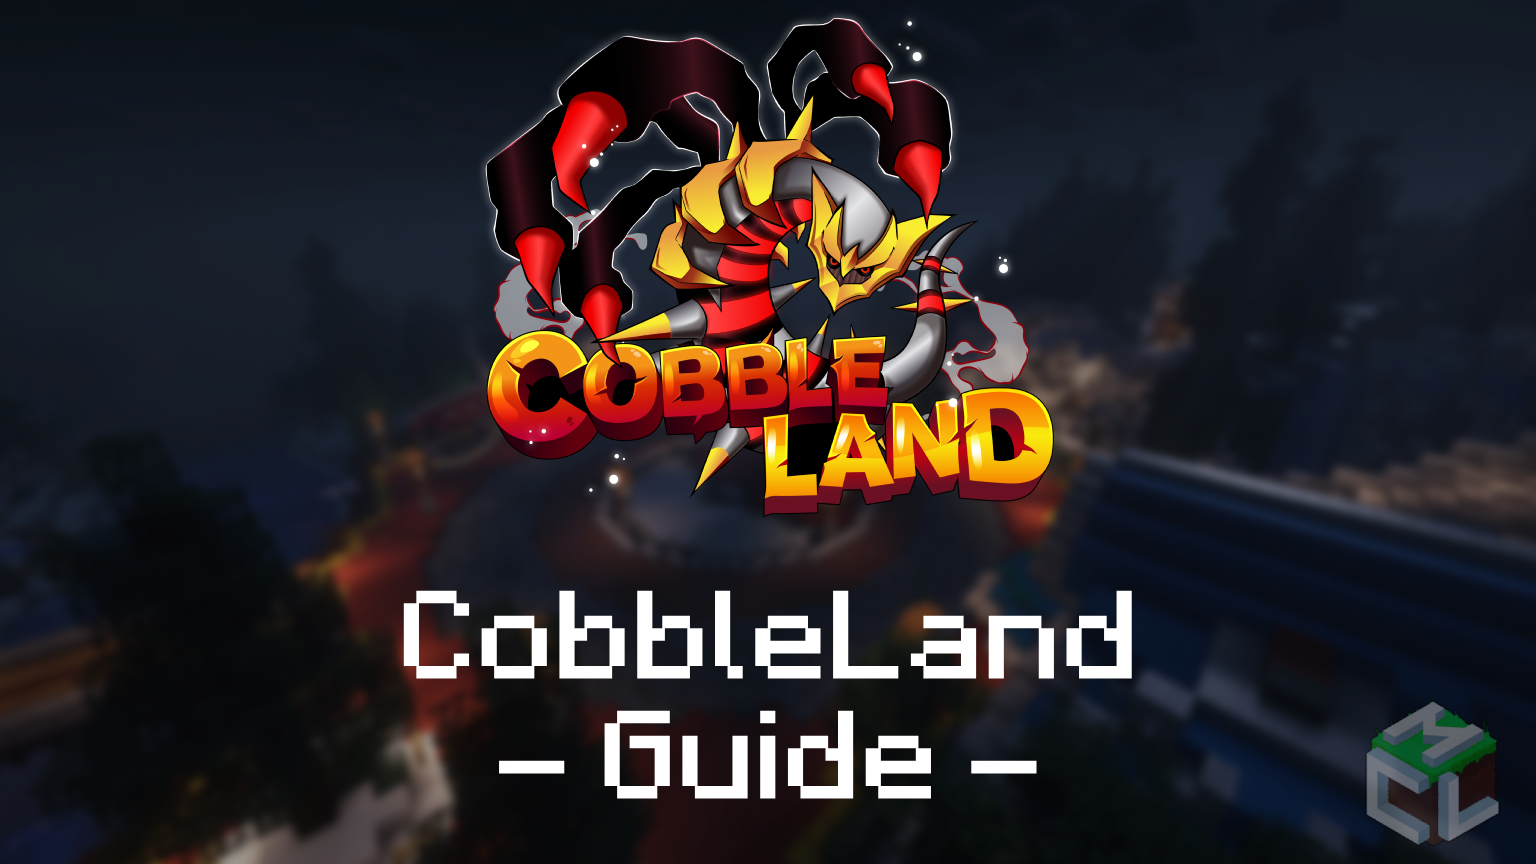 CobbleLand: Experience the adventures of Pokémon in the Minecraft universe